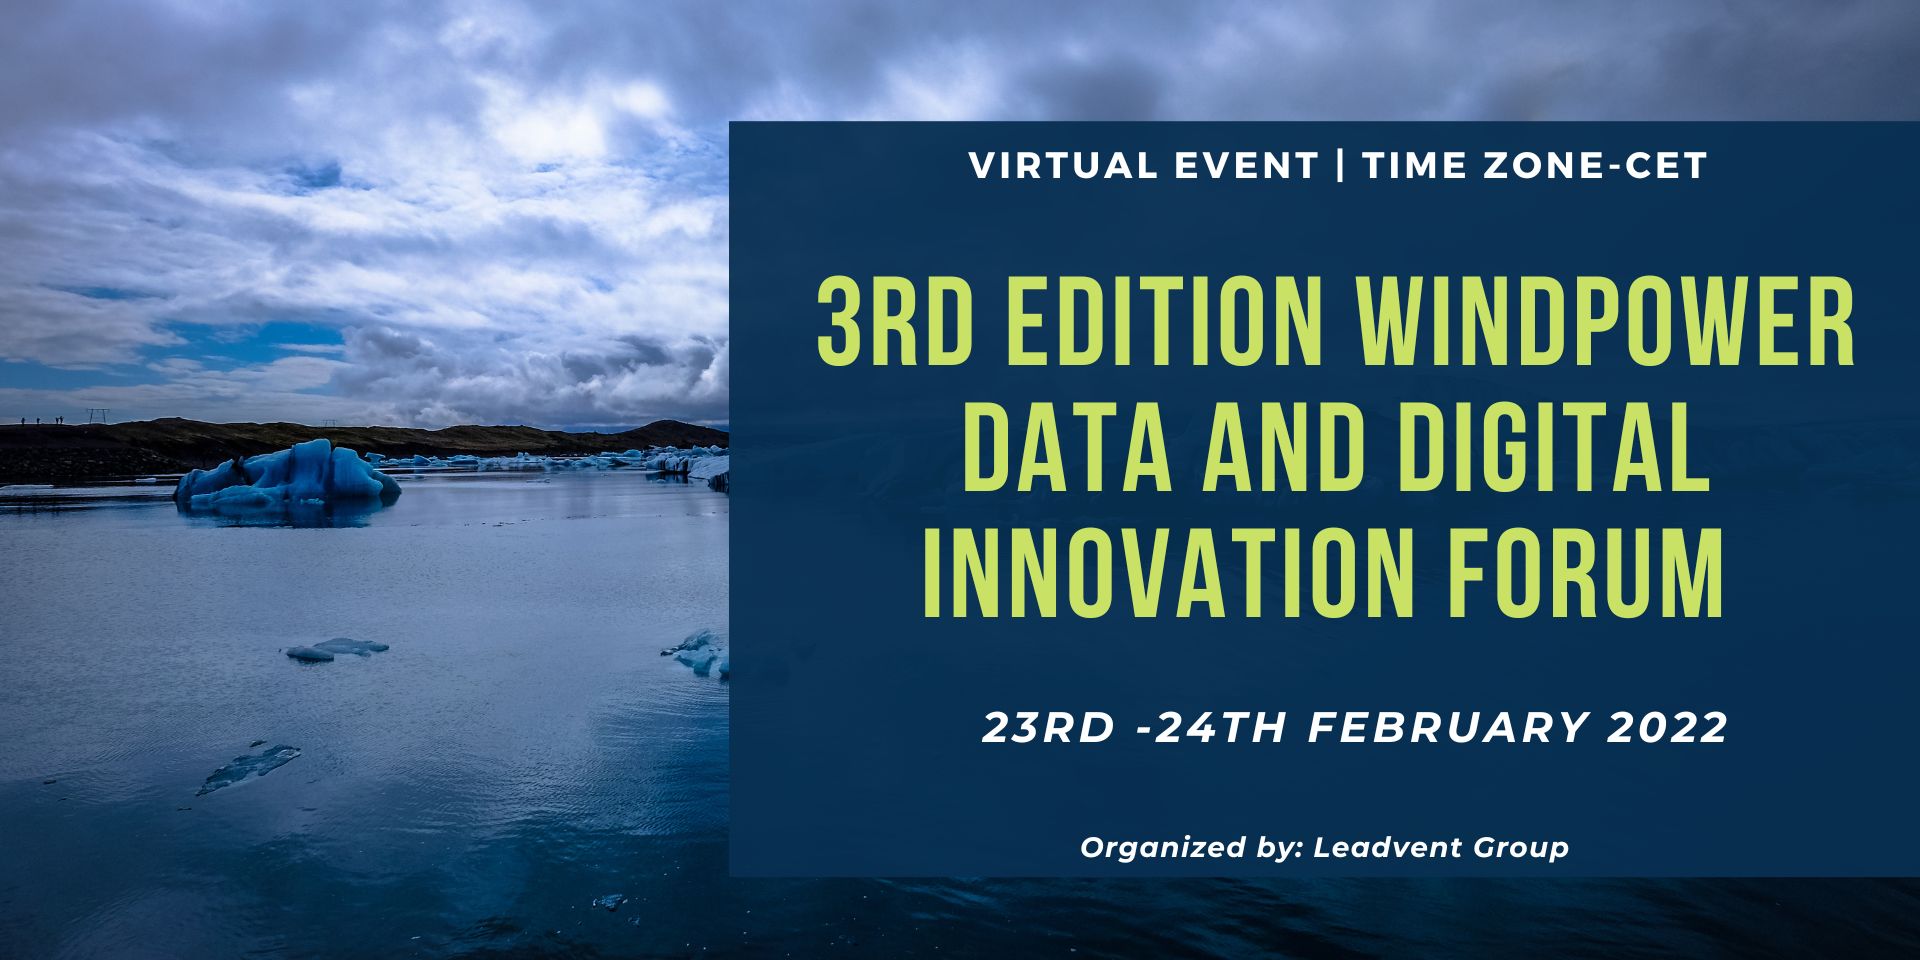 3rd Edition Windpower Data and Digital Innovation Forum organized by Leadvent Group